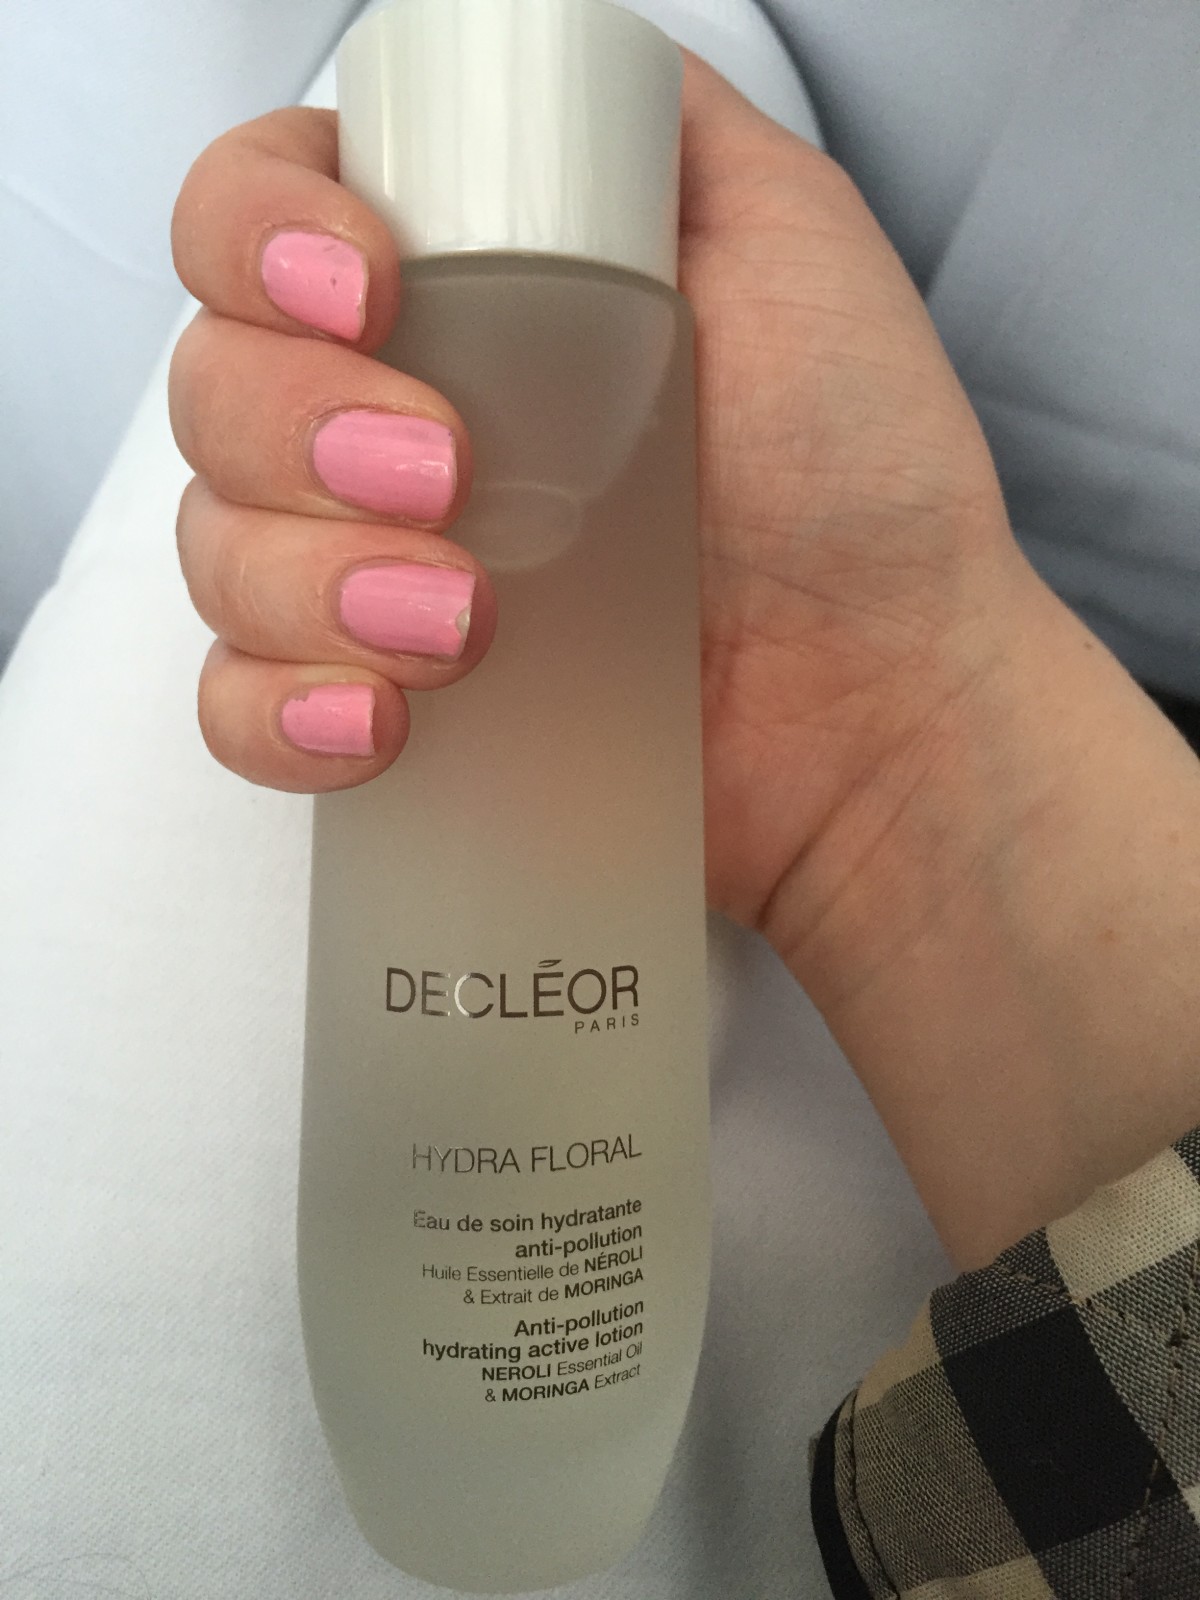 Meet Your New Skin Obsession From DECLÉOR